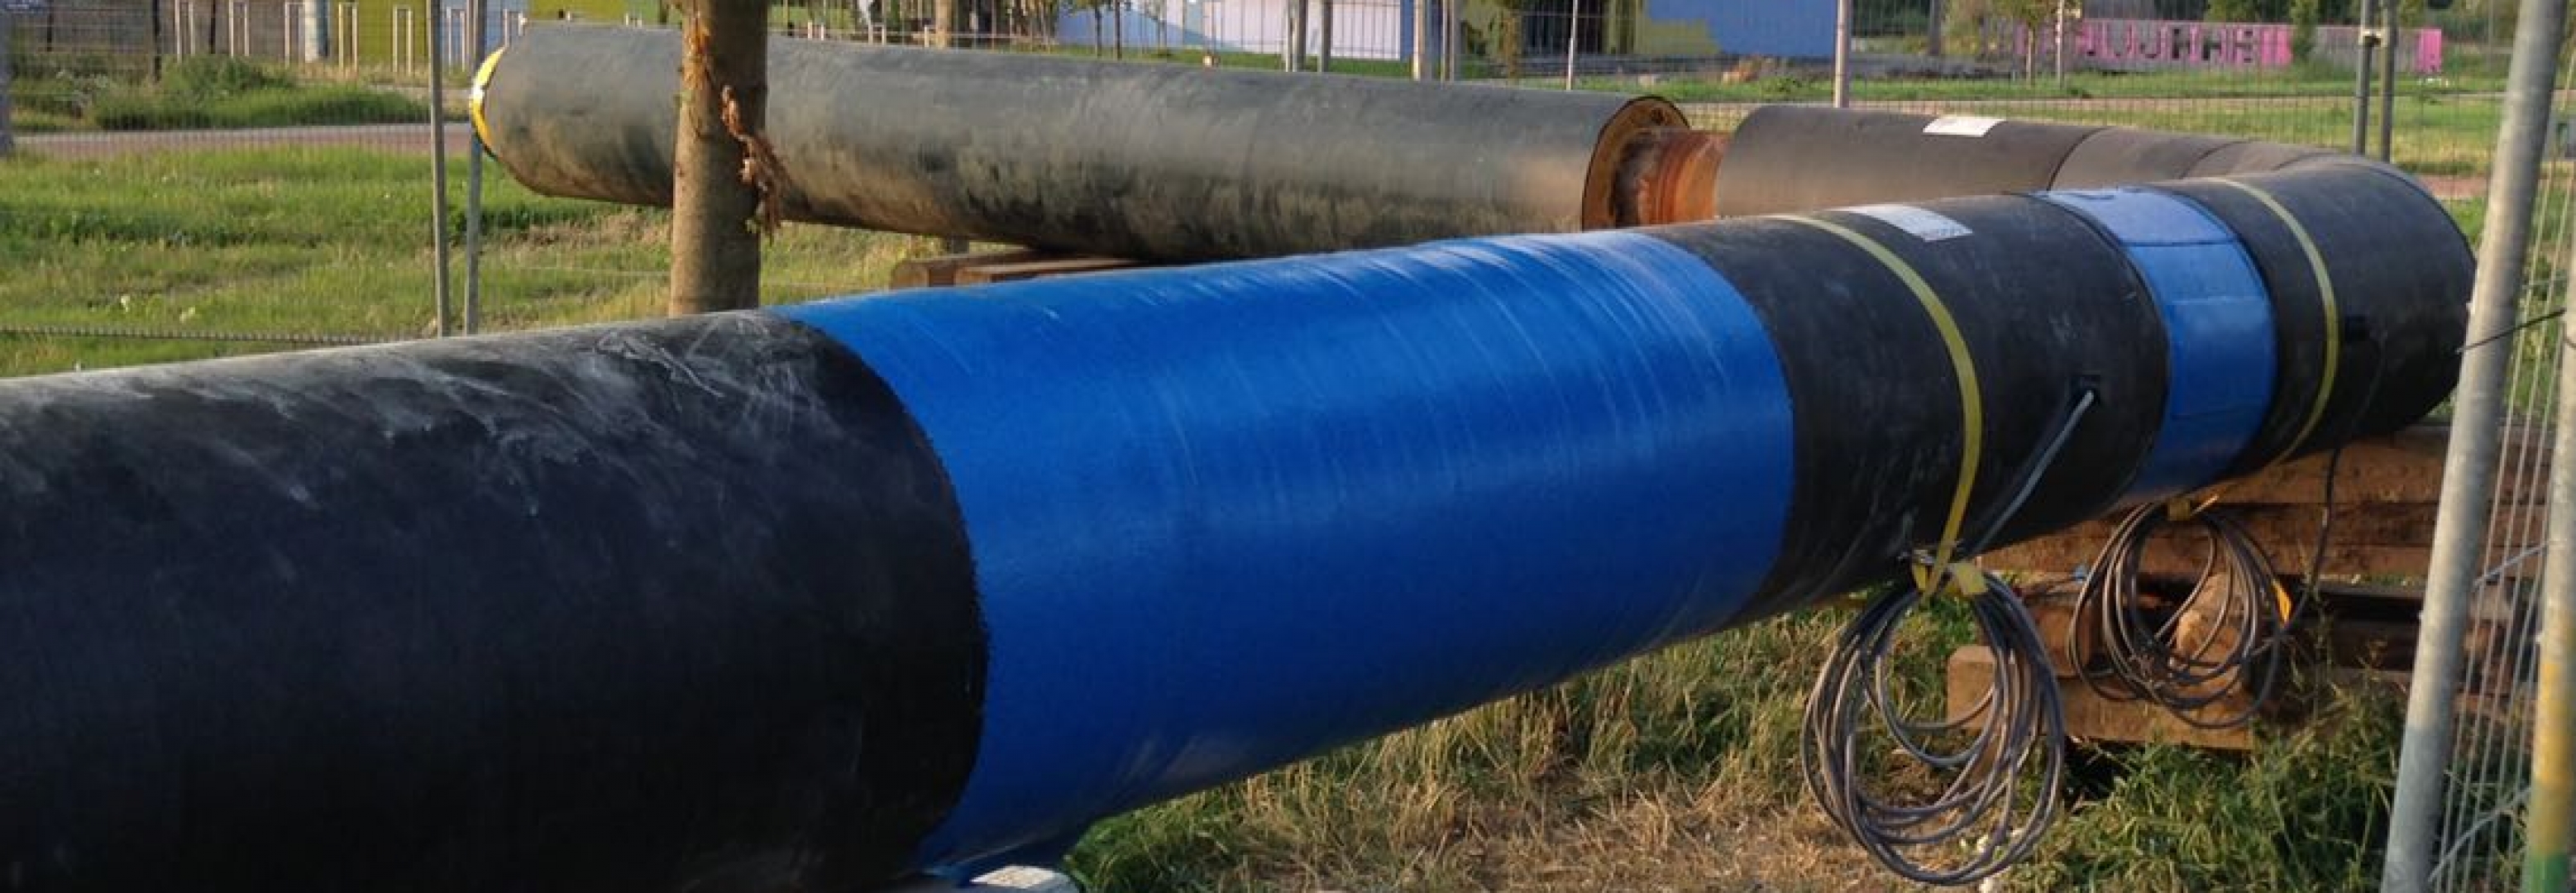 SWAPE barrier (water trap for heat and cold piping systems such as district heating)